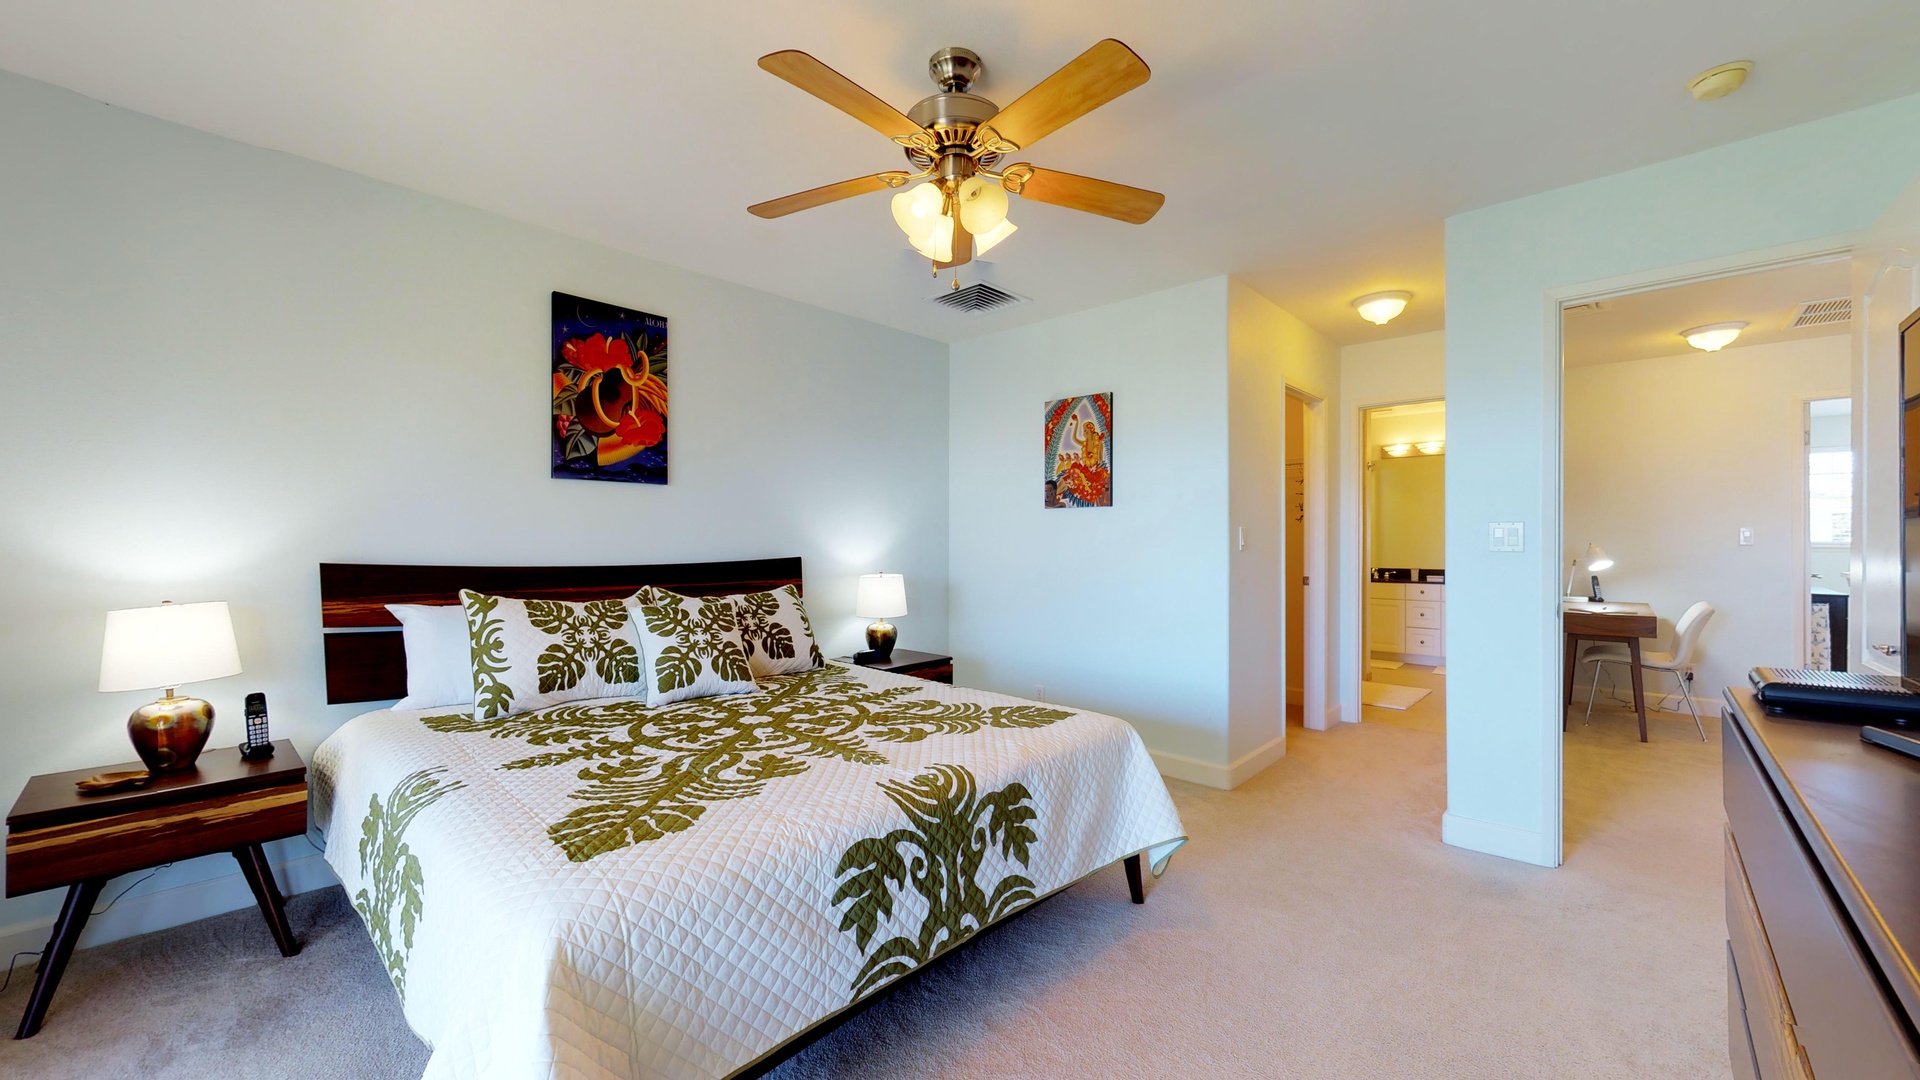 Kapolei Vacation Rentals, Ko Olina Kai 1035D - The spacious primary guest bedroom upstairs with soft linens and a ceiling fan.